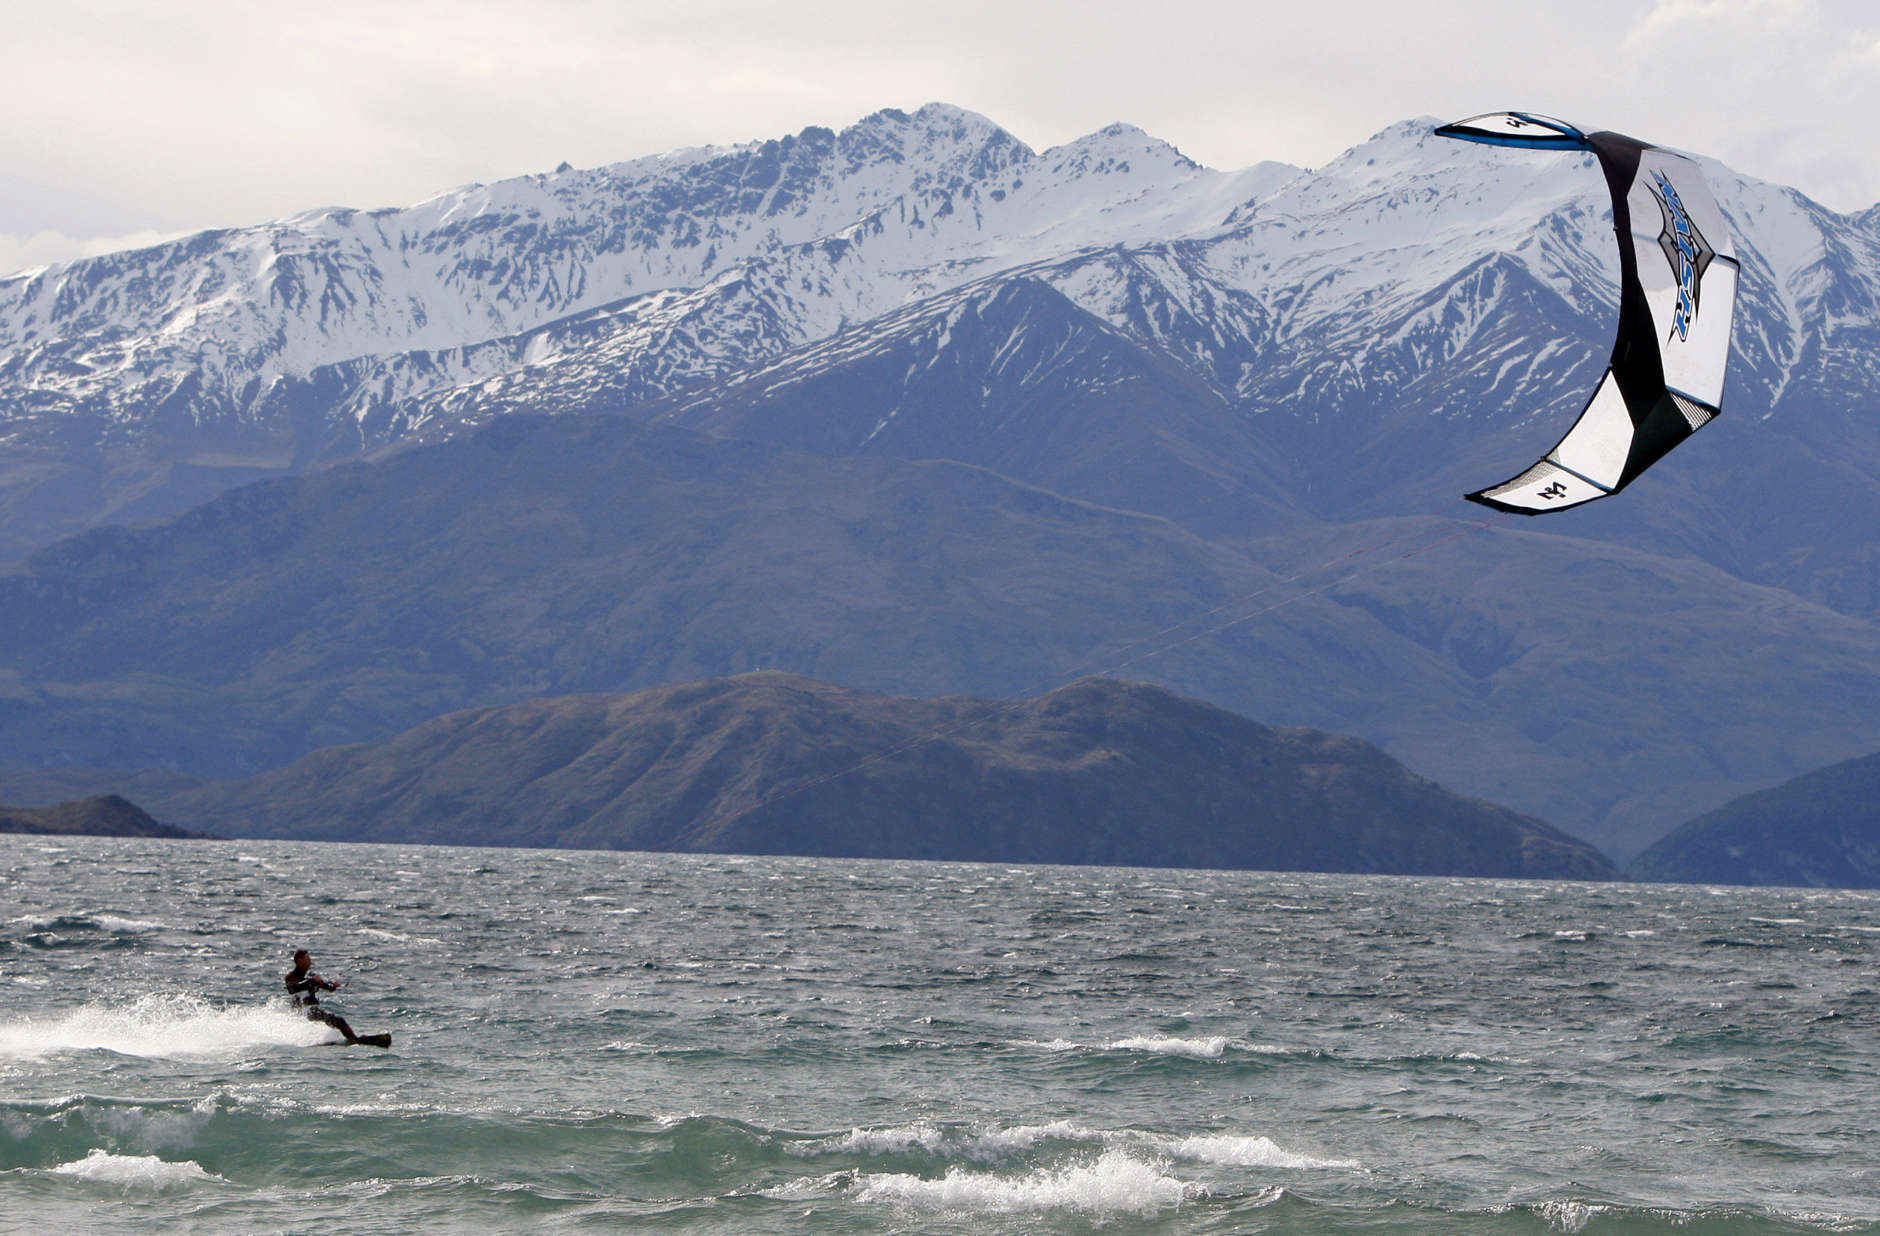 A kite surfer races across Lake Wanaka with the snow capped mountains of the Southern Alps behind as he makes the most of strong north westerly winds that buffeted the ski resort town of Wanaka in New Zealand's South Island, Saturday, Oct. 4, 2008. (AP Photo/Mark Baker)